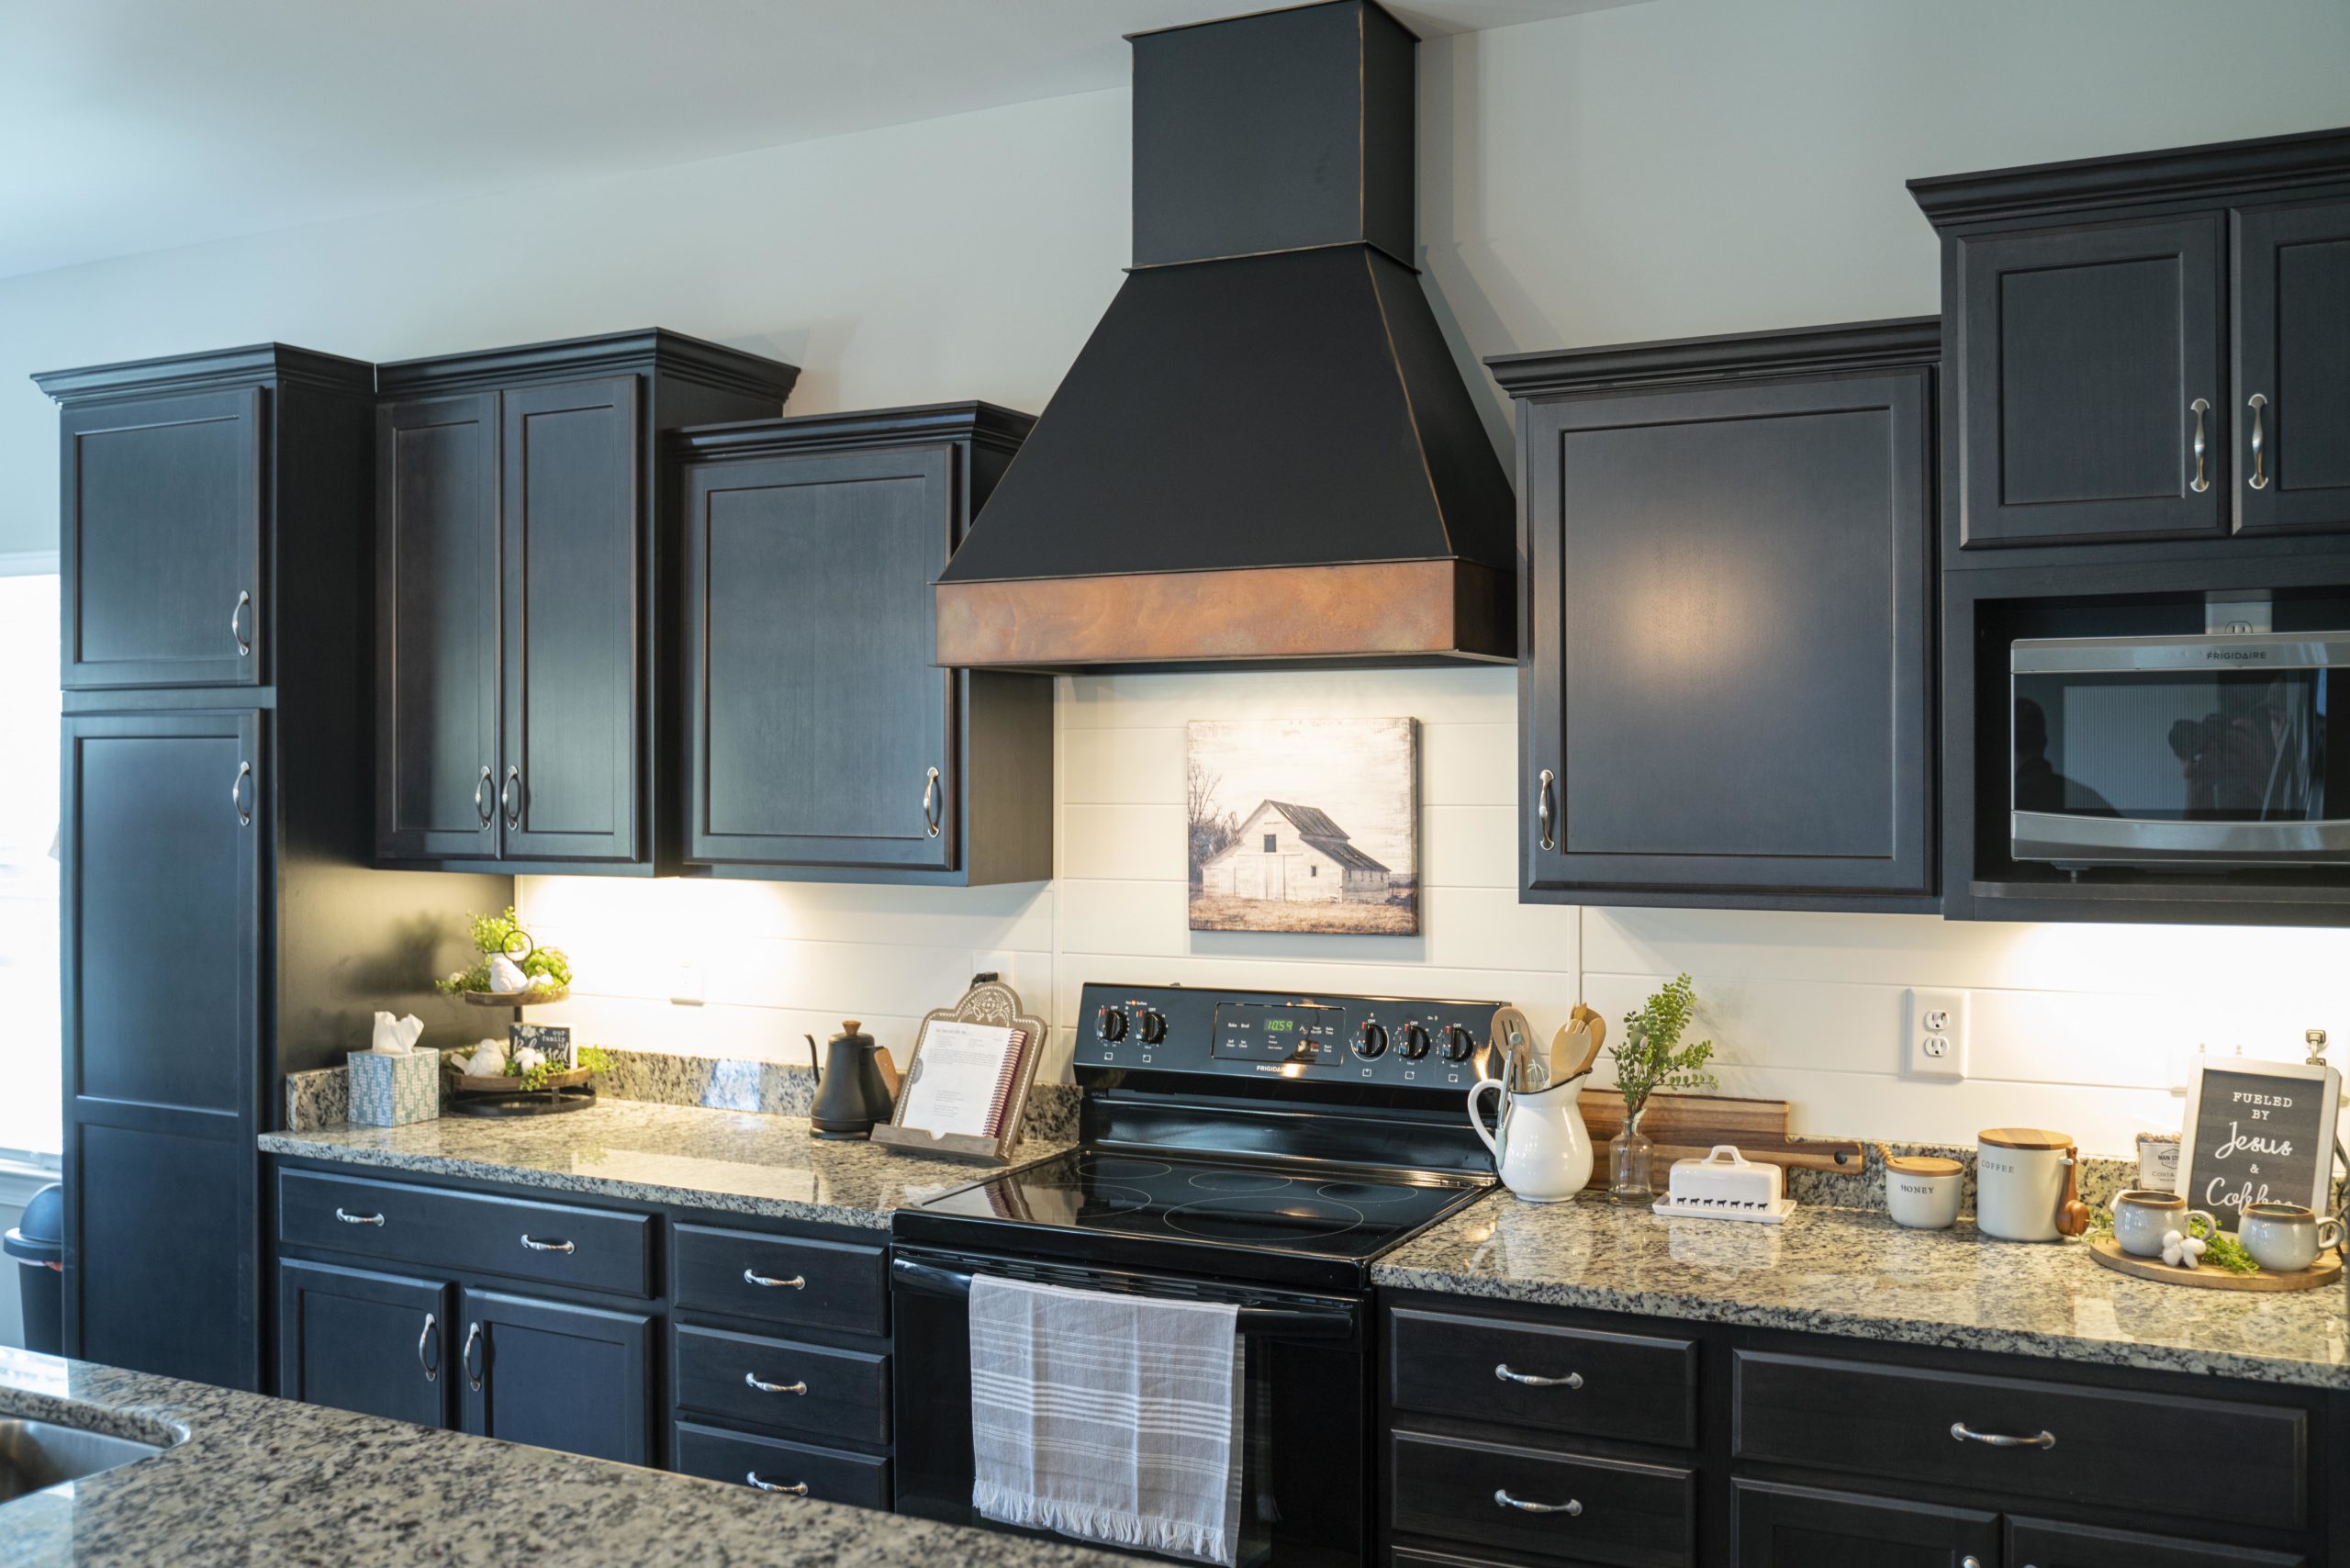 A Brushed Black Range Hood created by Stoll Industries in a dark kitchen remodel.